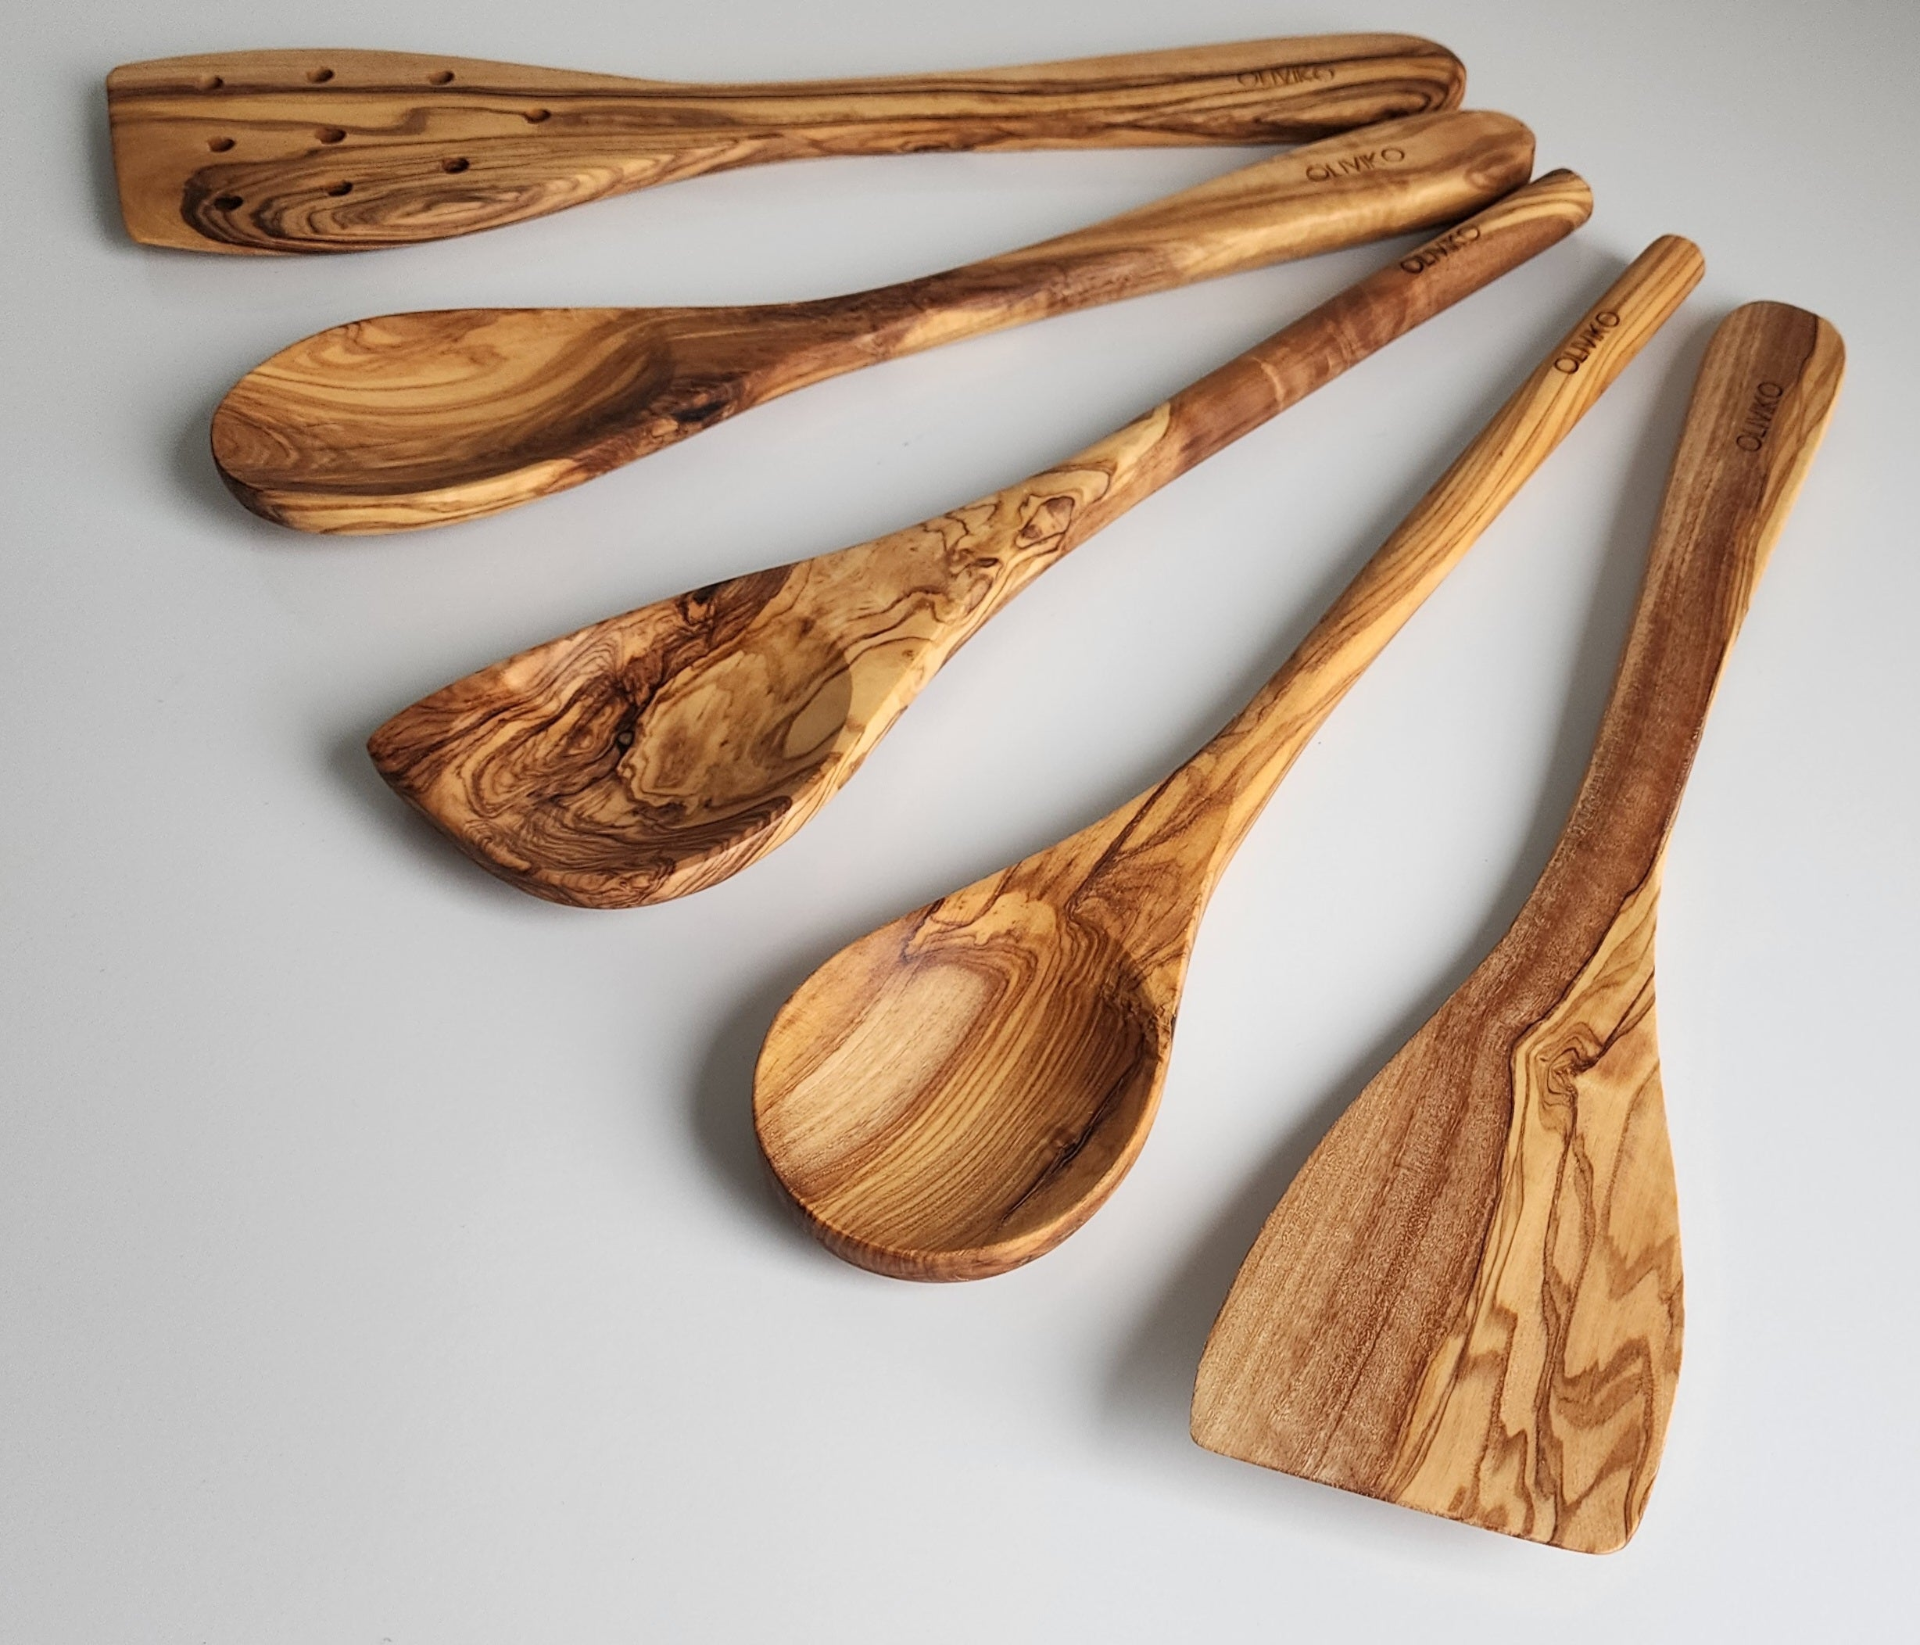 Handcrafted Olive Wood Utensil Set with Holder - 2 Spatulas & 3 Spoons, Goodies N Stuff